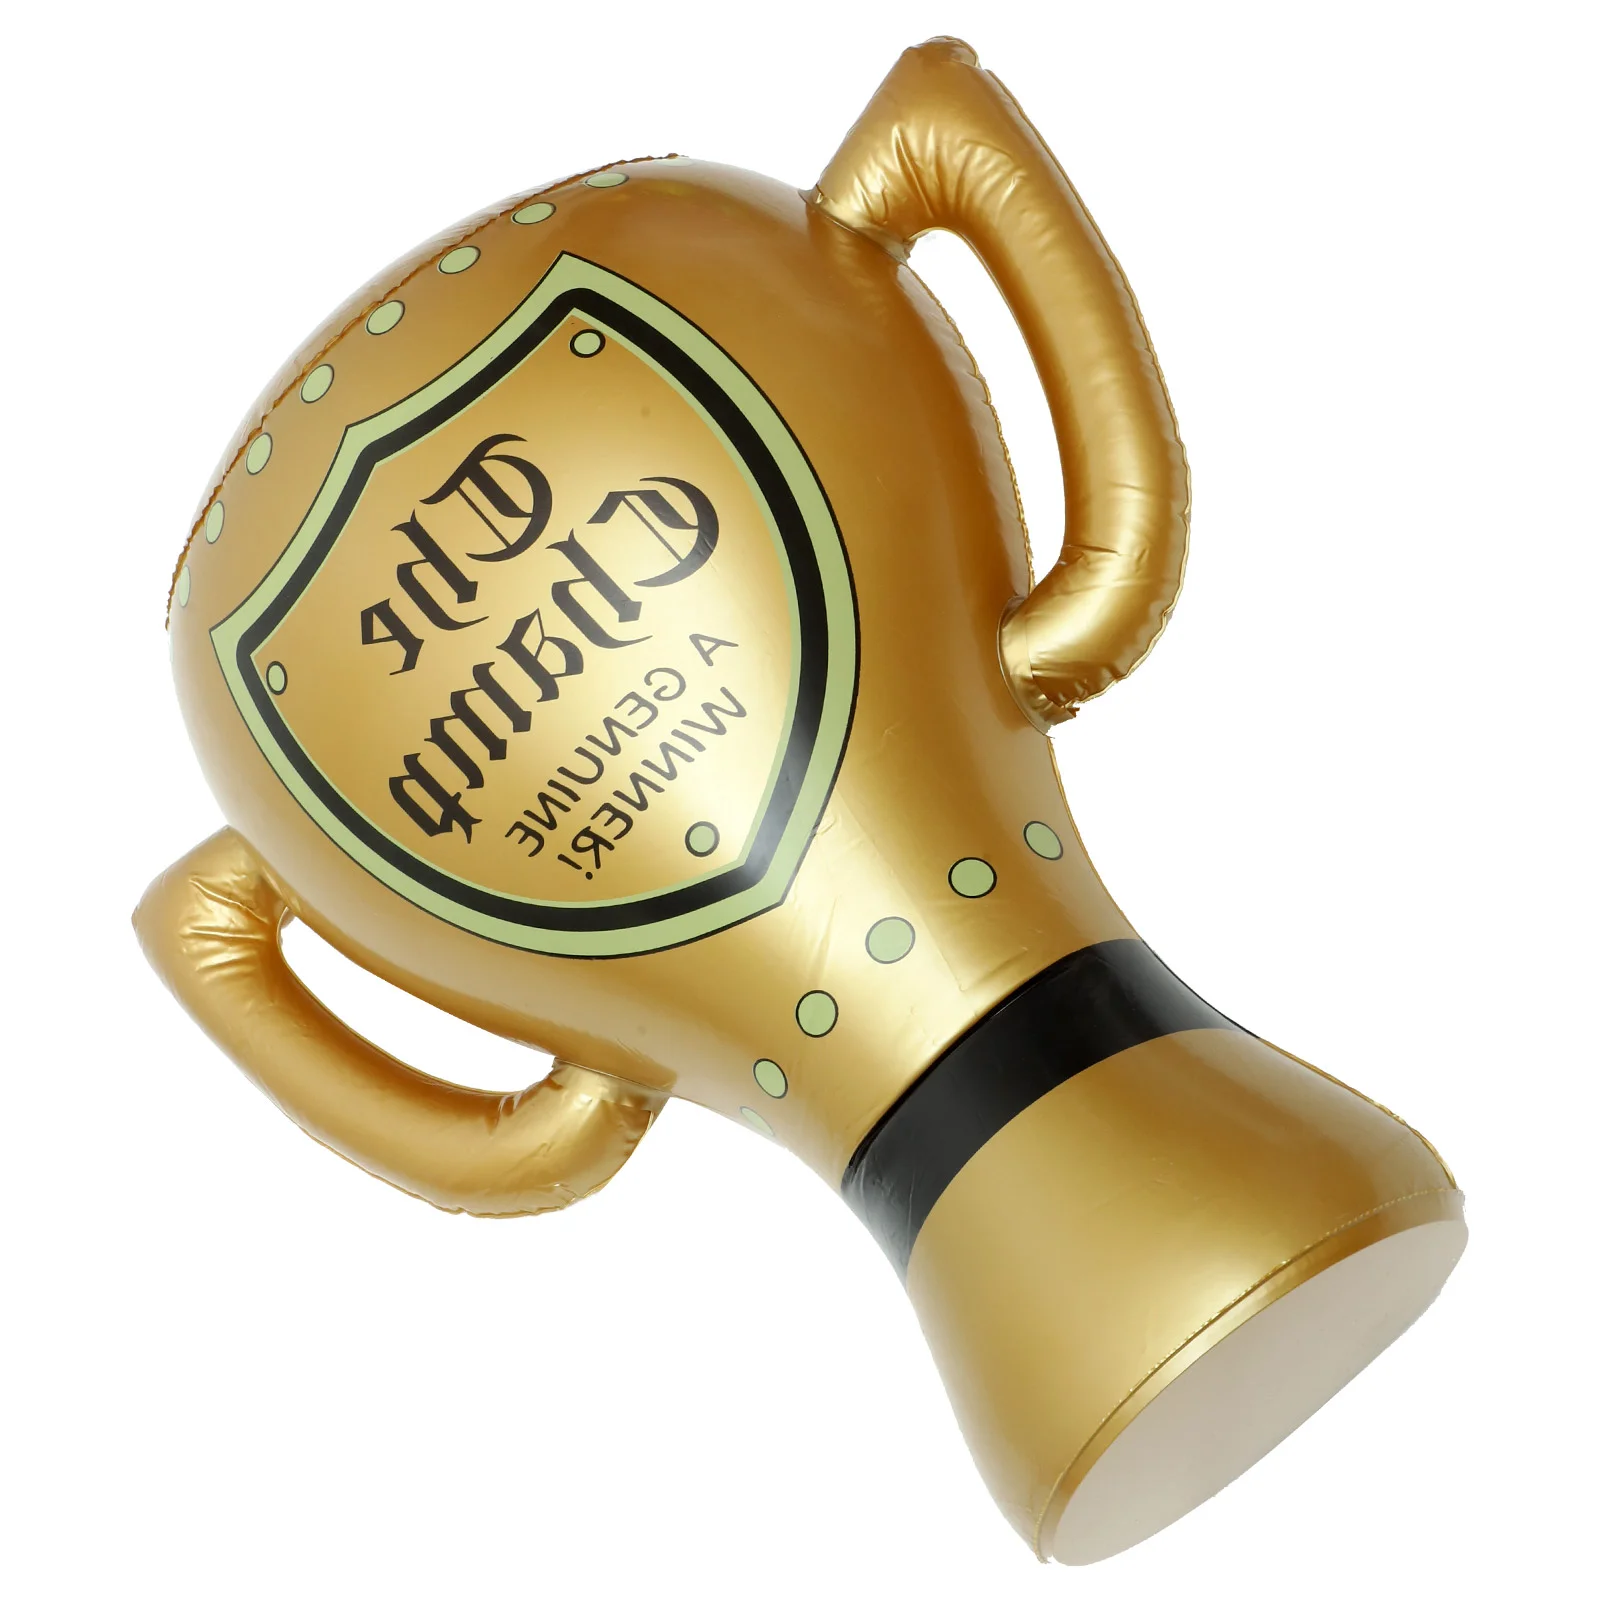 

Trophy Kids Award Trophy Trophys for Classroom Activities Carnival Games Birthday Party Kids Gift ( )